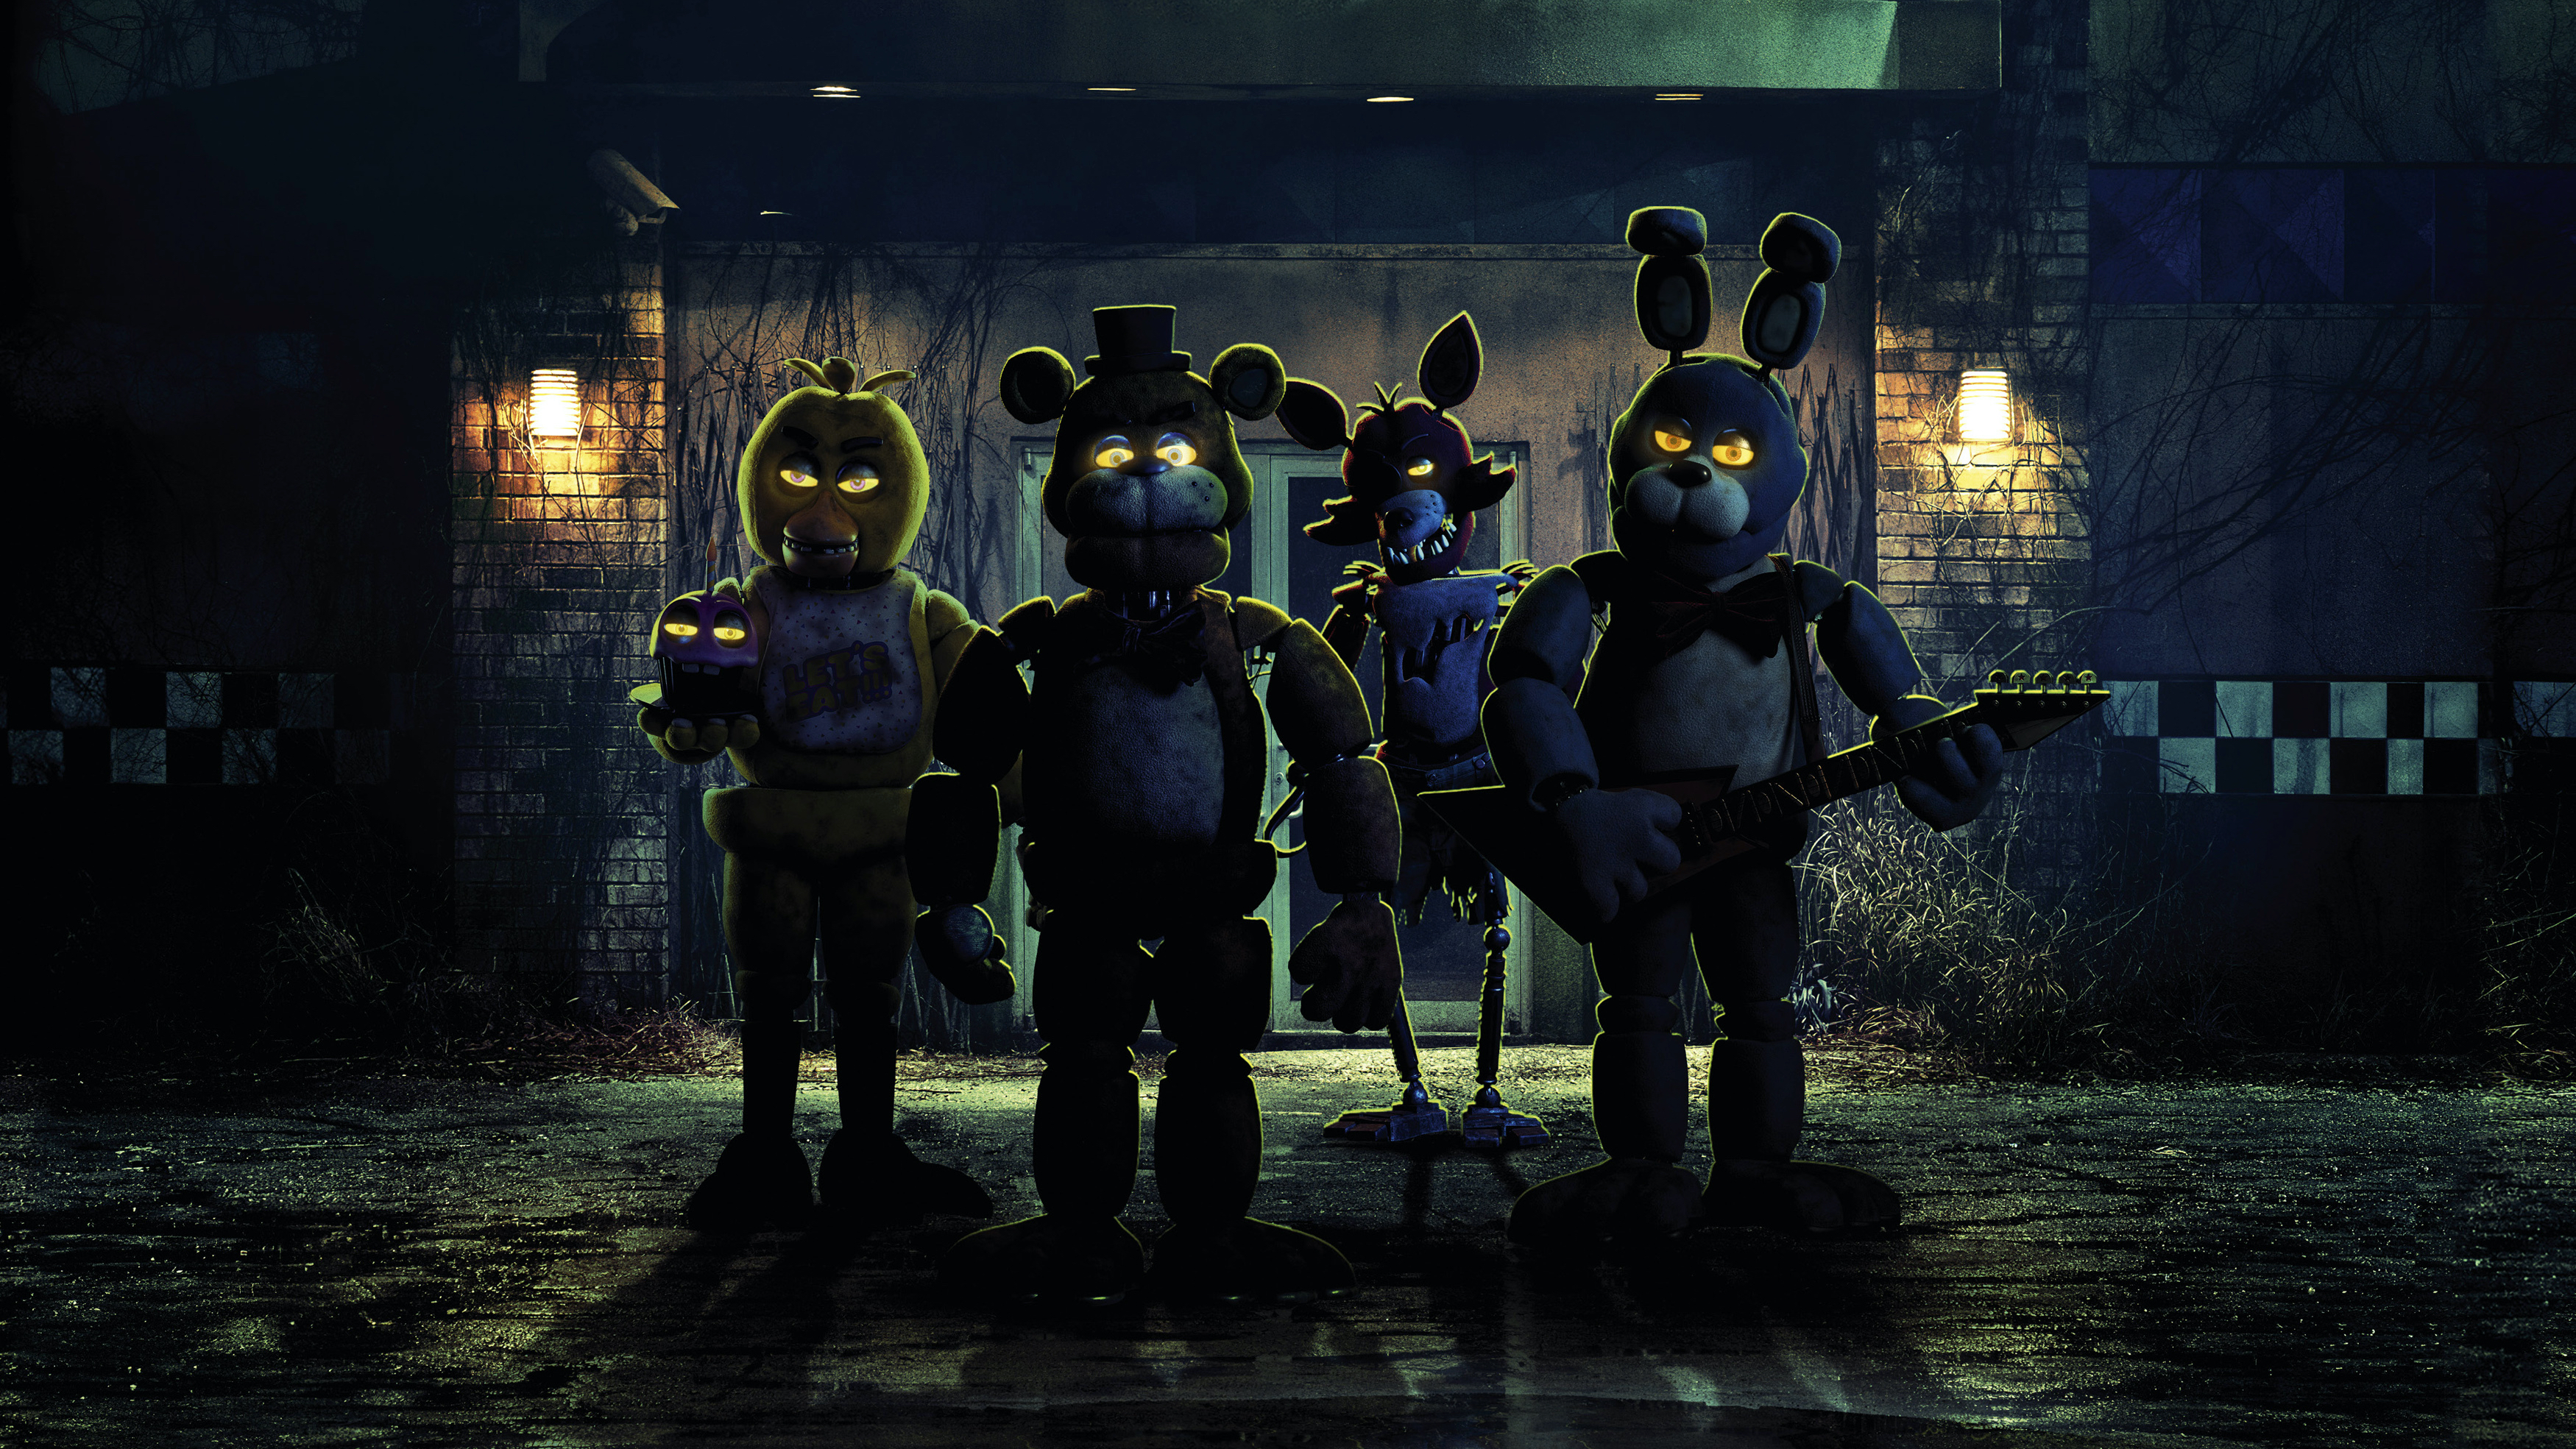 Movie Five Nights at Freddy's HD Wallpaper | Background Image